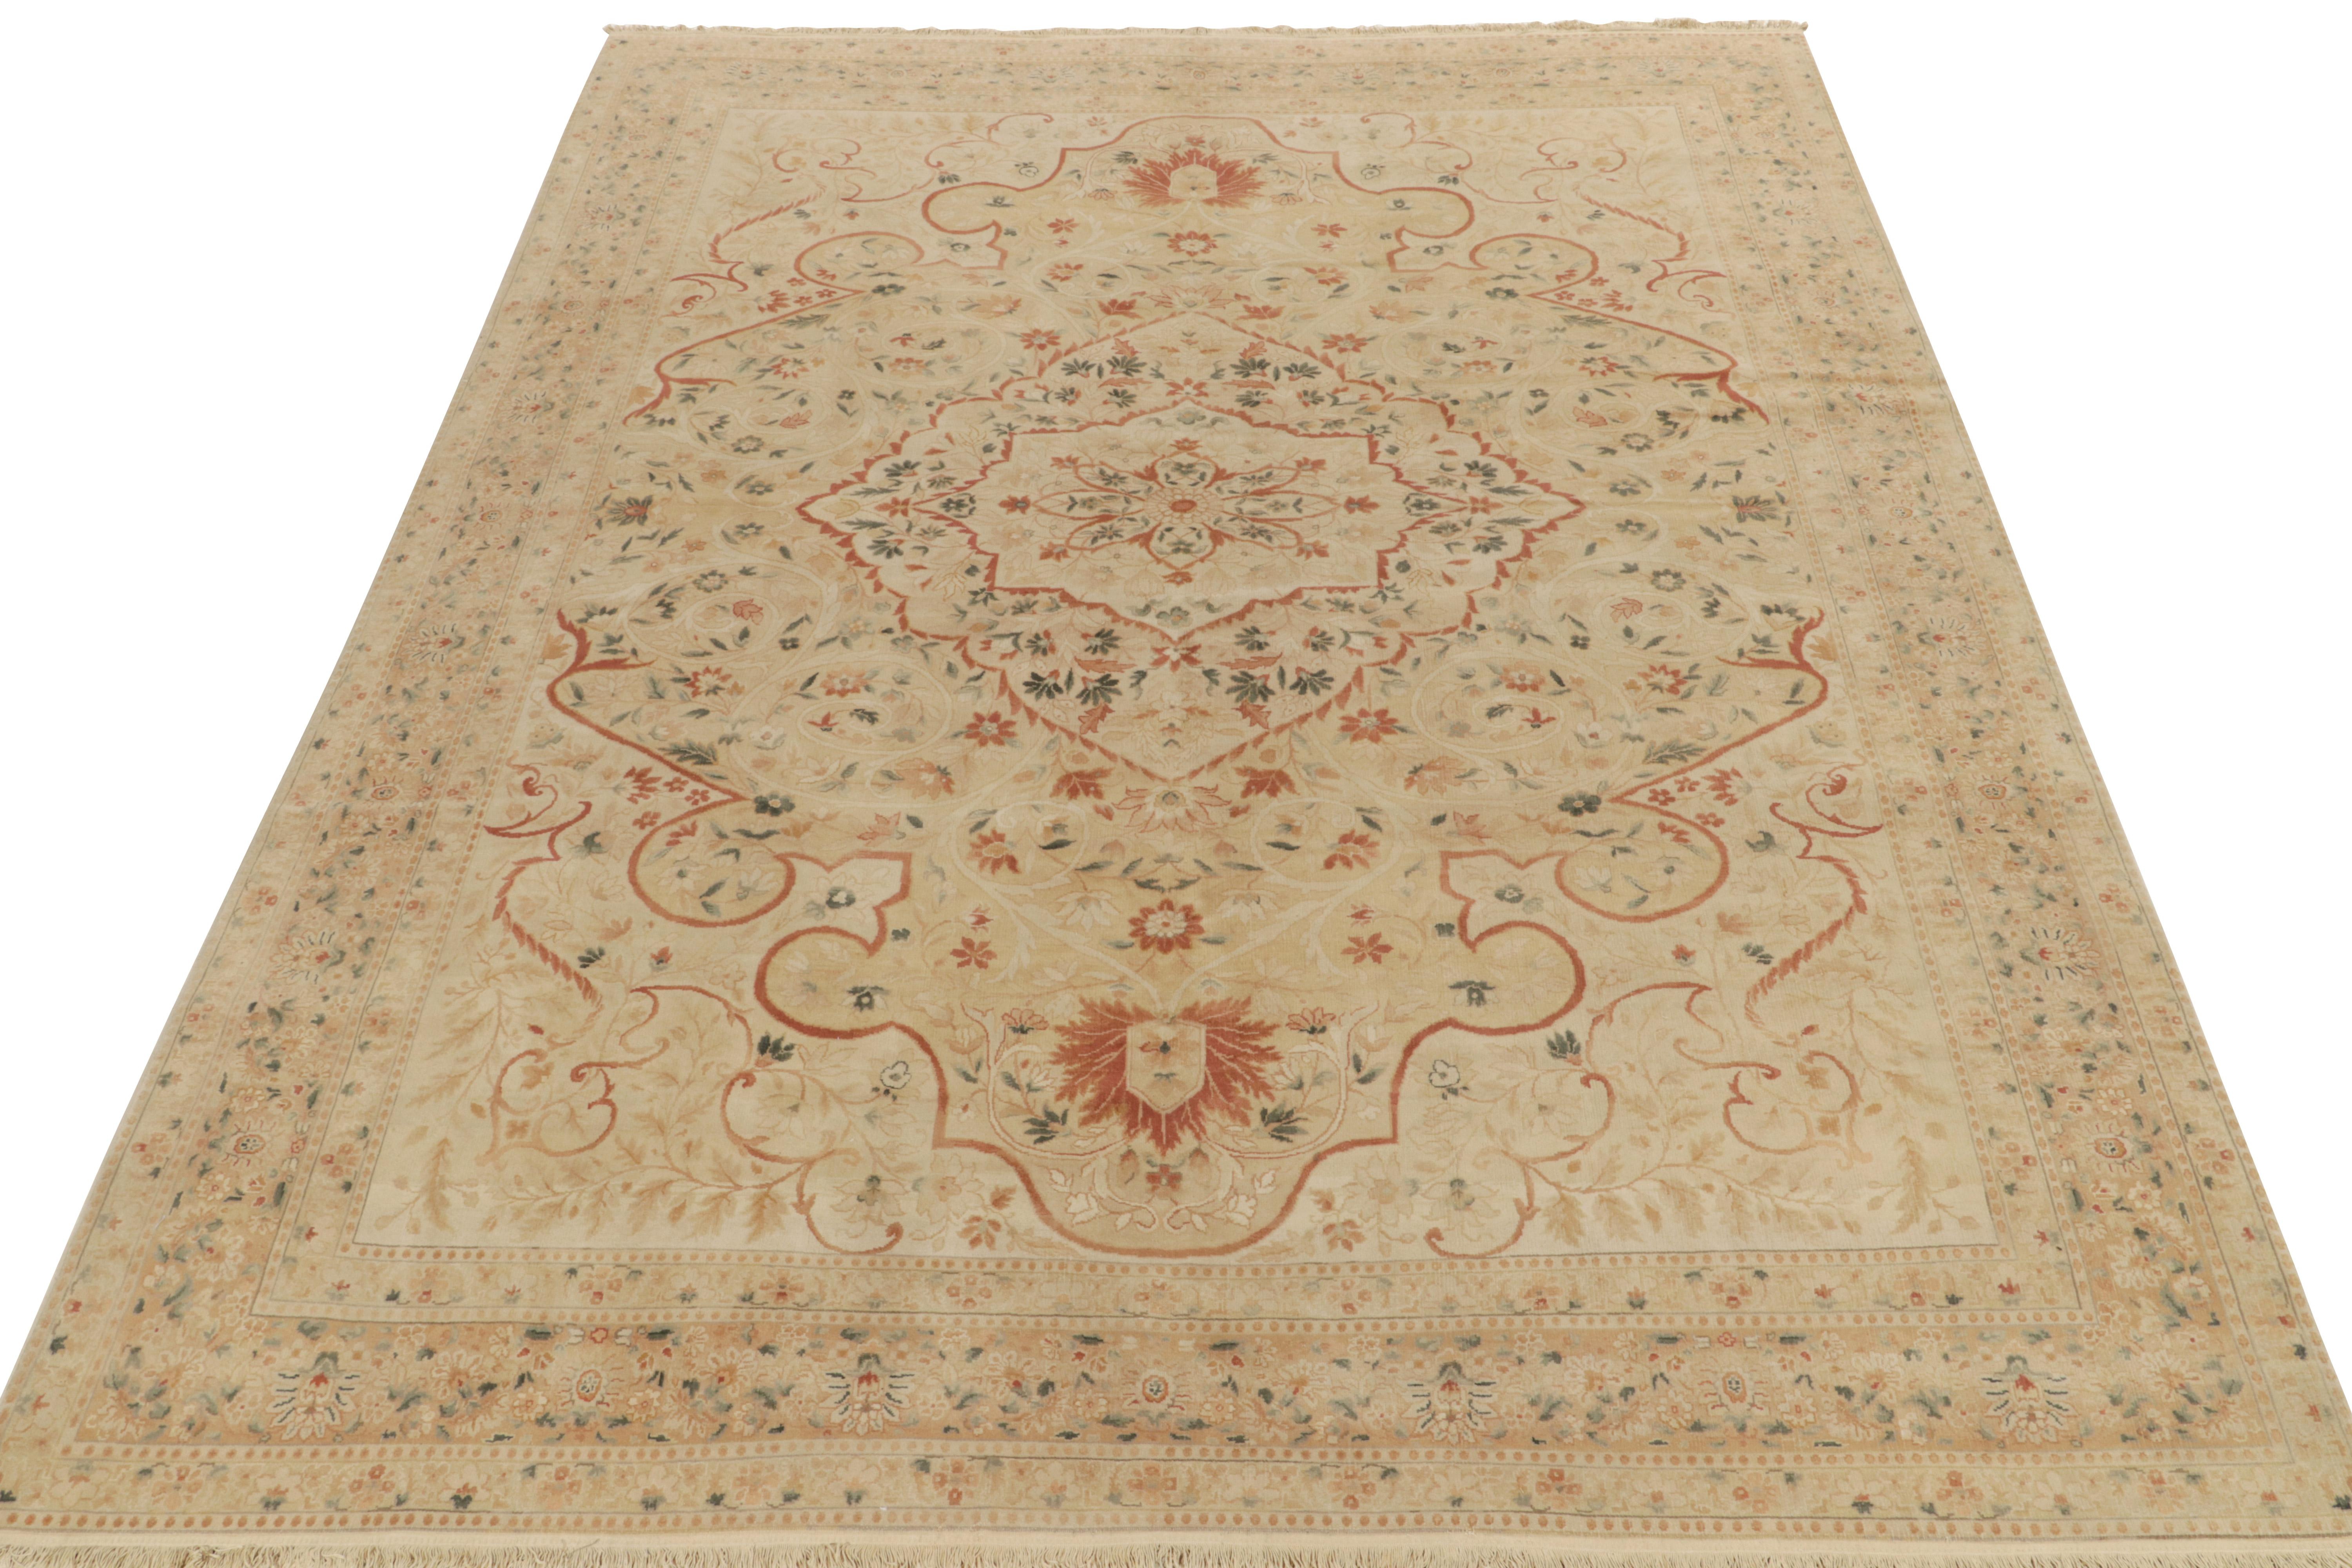 Marking an exquisite take on an antique Tabriz Persian rug style of the late 19th century is a 9x12 all wool rug from our Modern Classics collection. The hand-knotted creation reads a beautiful floral medallion pattern in beige, green & red-brown